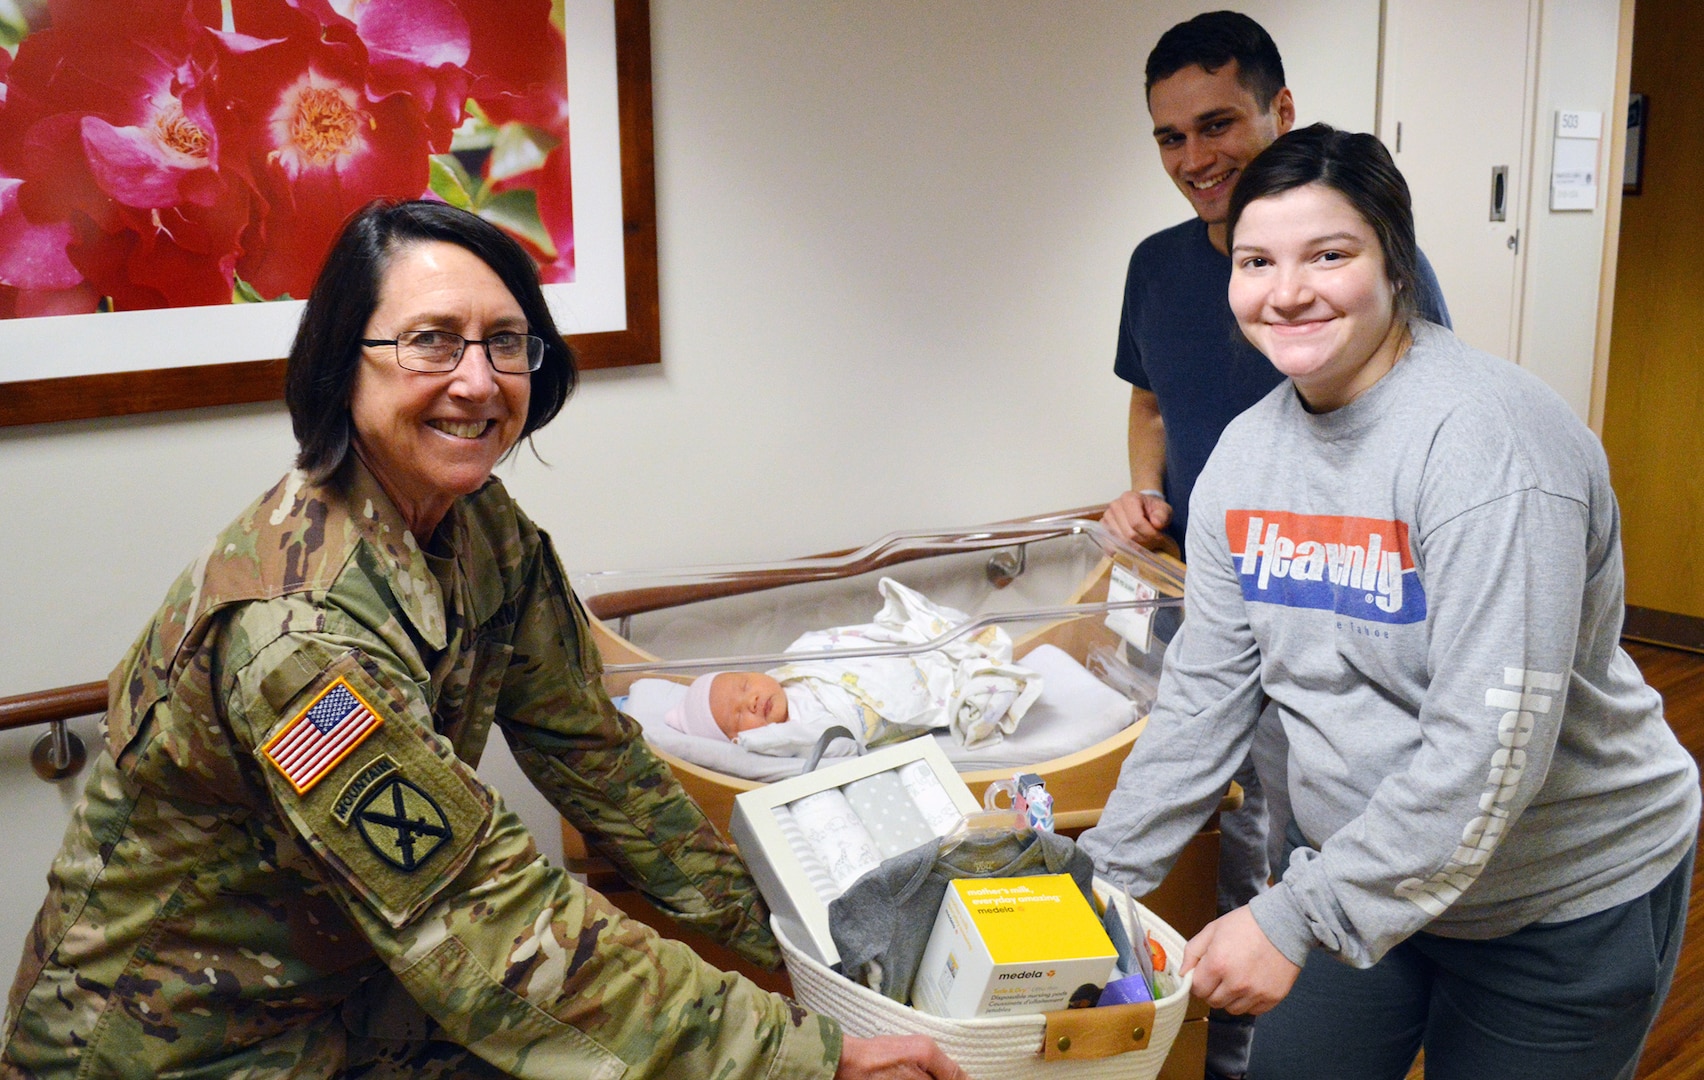 Brig. Gen. Wendy Harter, Brooke Army Medical Center commanding general, presents a gift basket from the BAMC Auxiliary to Airman 1st Class Anna Tritley and her husband, Sean, Jan. 3, 2020 to congratulate them on the birth of their daughter, Cora Noel. The 7-pound, 9-ounce, 19.5-inch-long baby girl was BAMC’s first baby of the new year, born at 1 a.m. on Jan. 1, 2020.